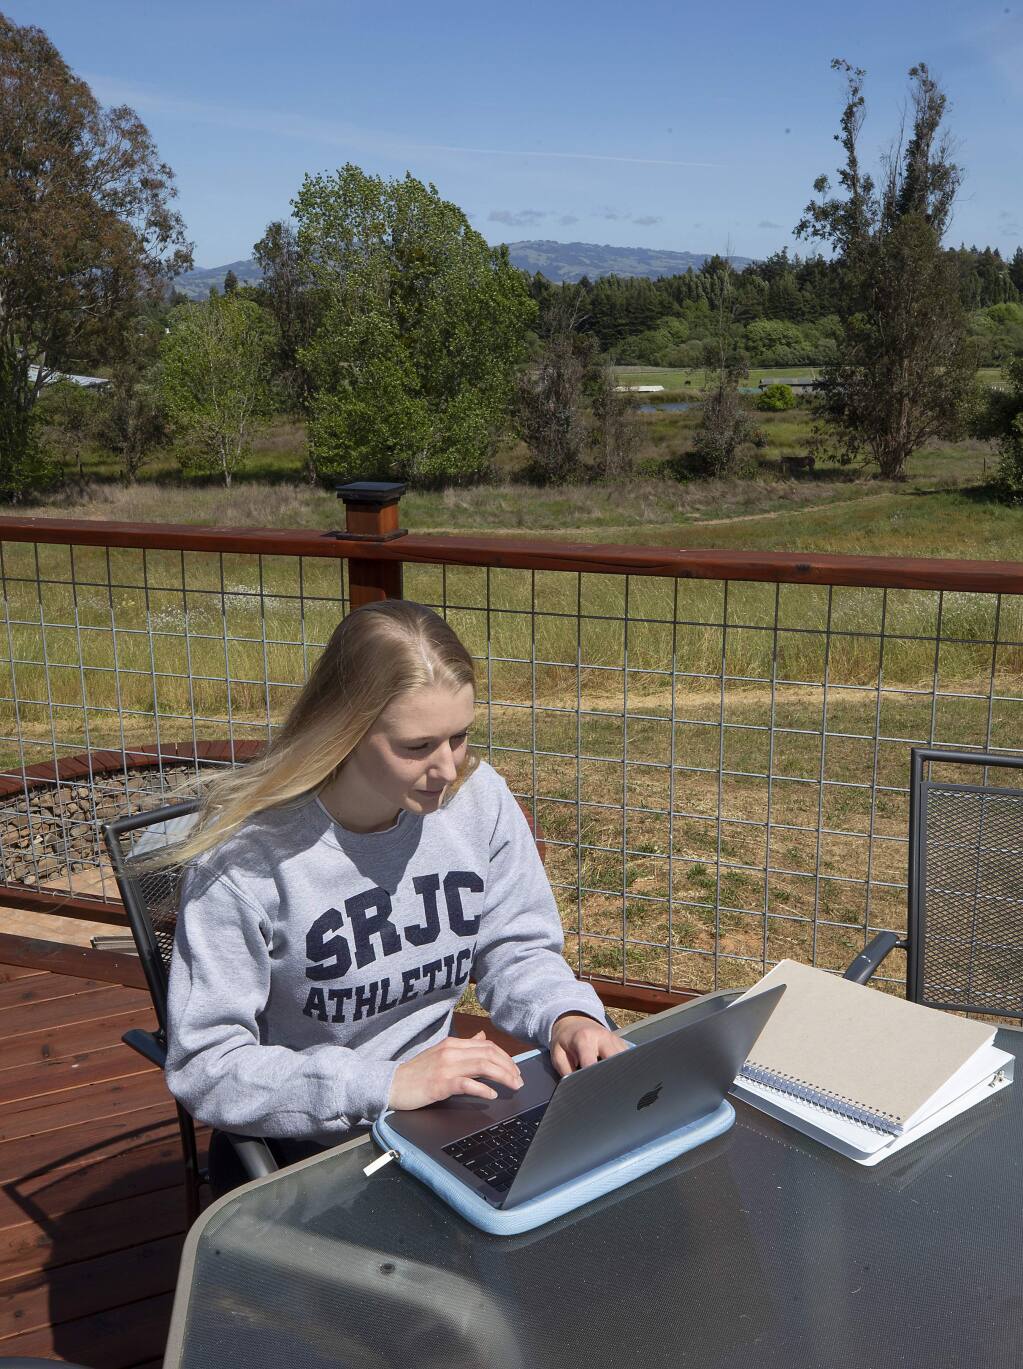 SRJC student Tallulah Kuula, who is transferring to UC Davis this fall, studies for an online biology class on the back deck of her Sebastopol home. (photo by John Burgess/The Press Democrat)